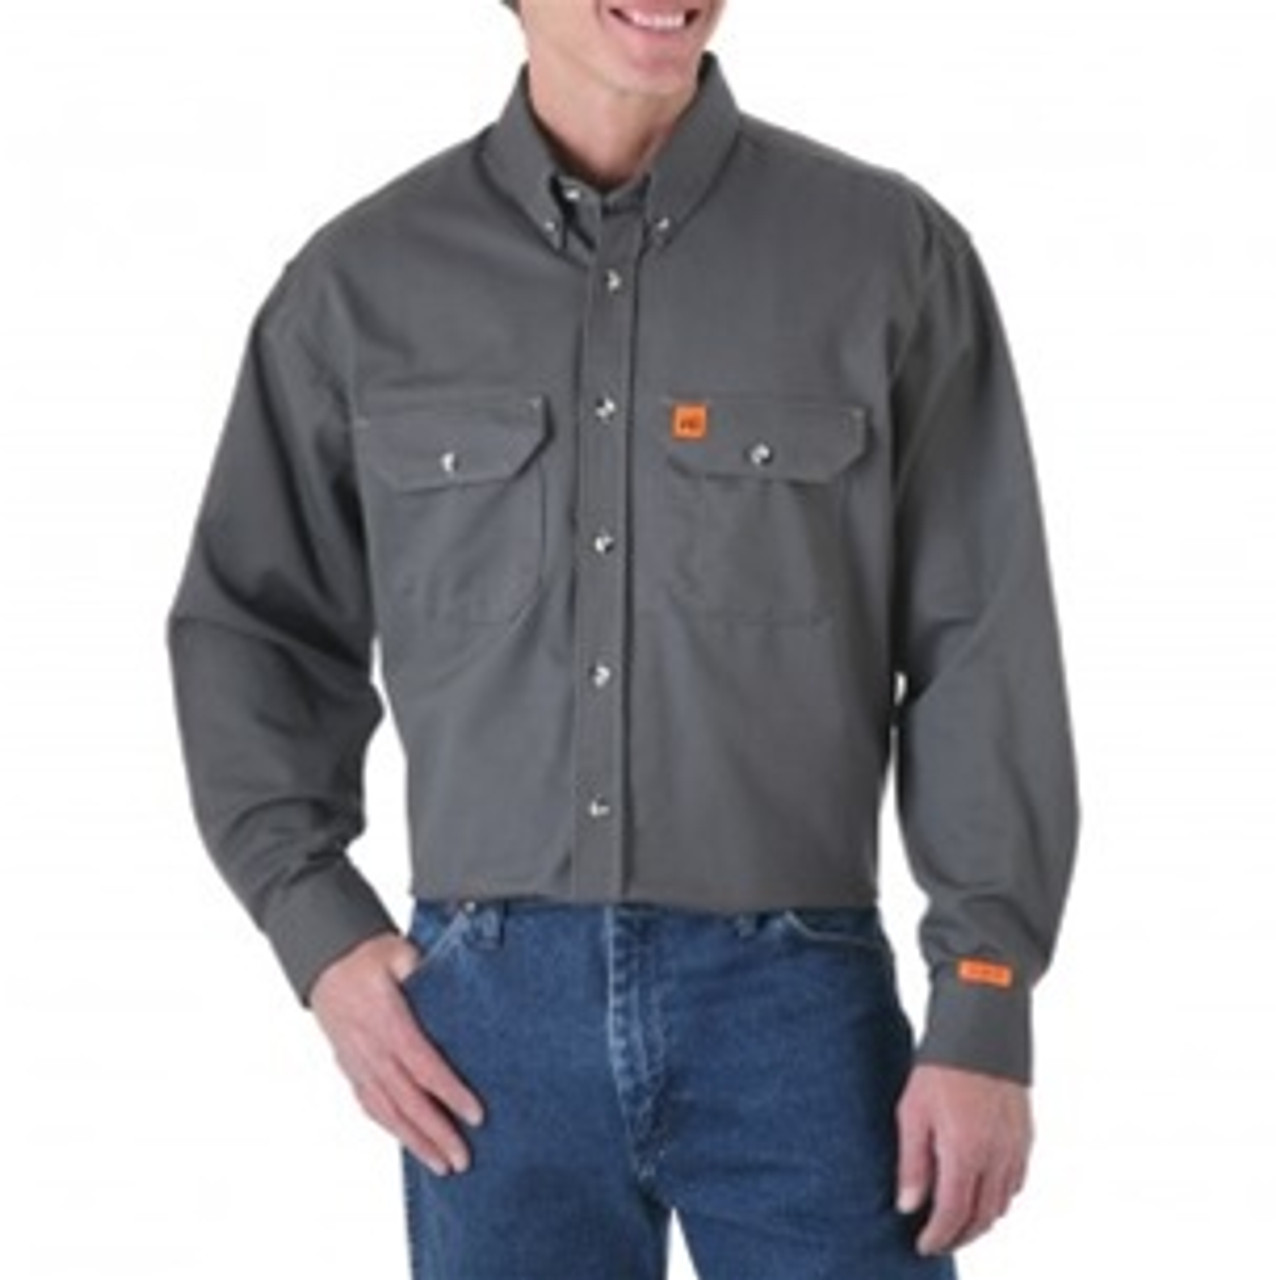 Wrangler Riggs Flame Resistant Grey Work Shirt - Gray - Size L2X | FR Depot